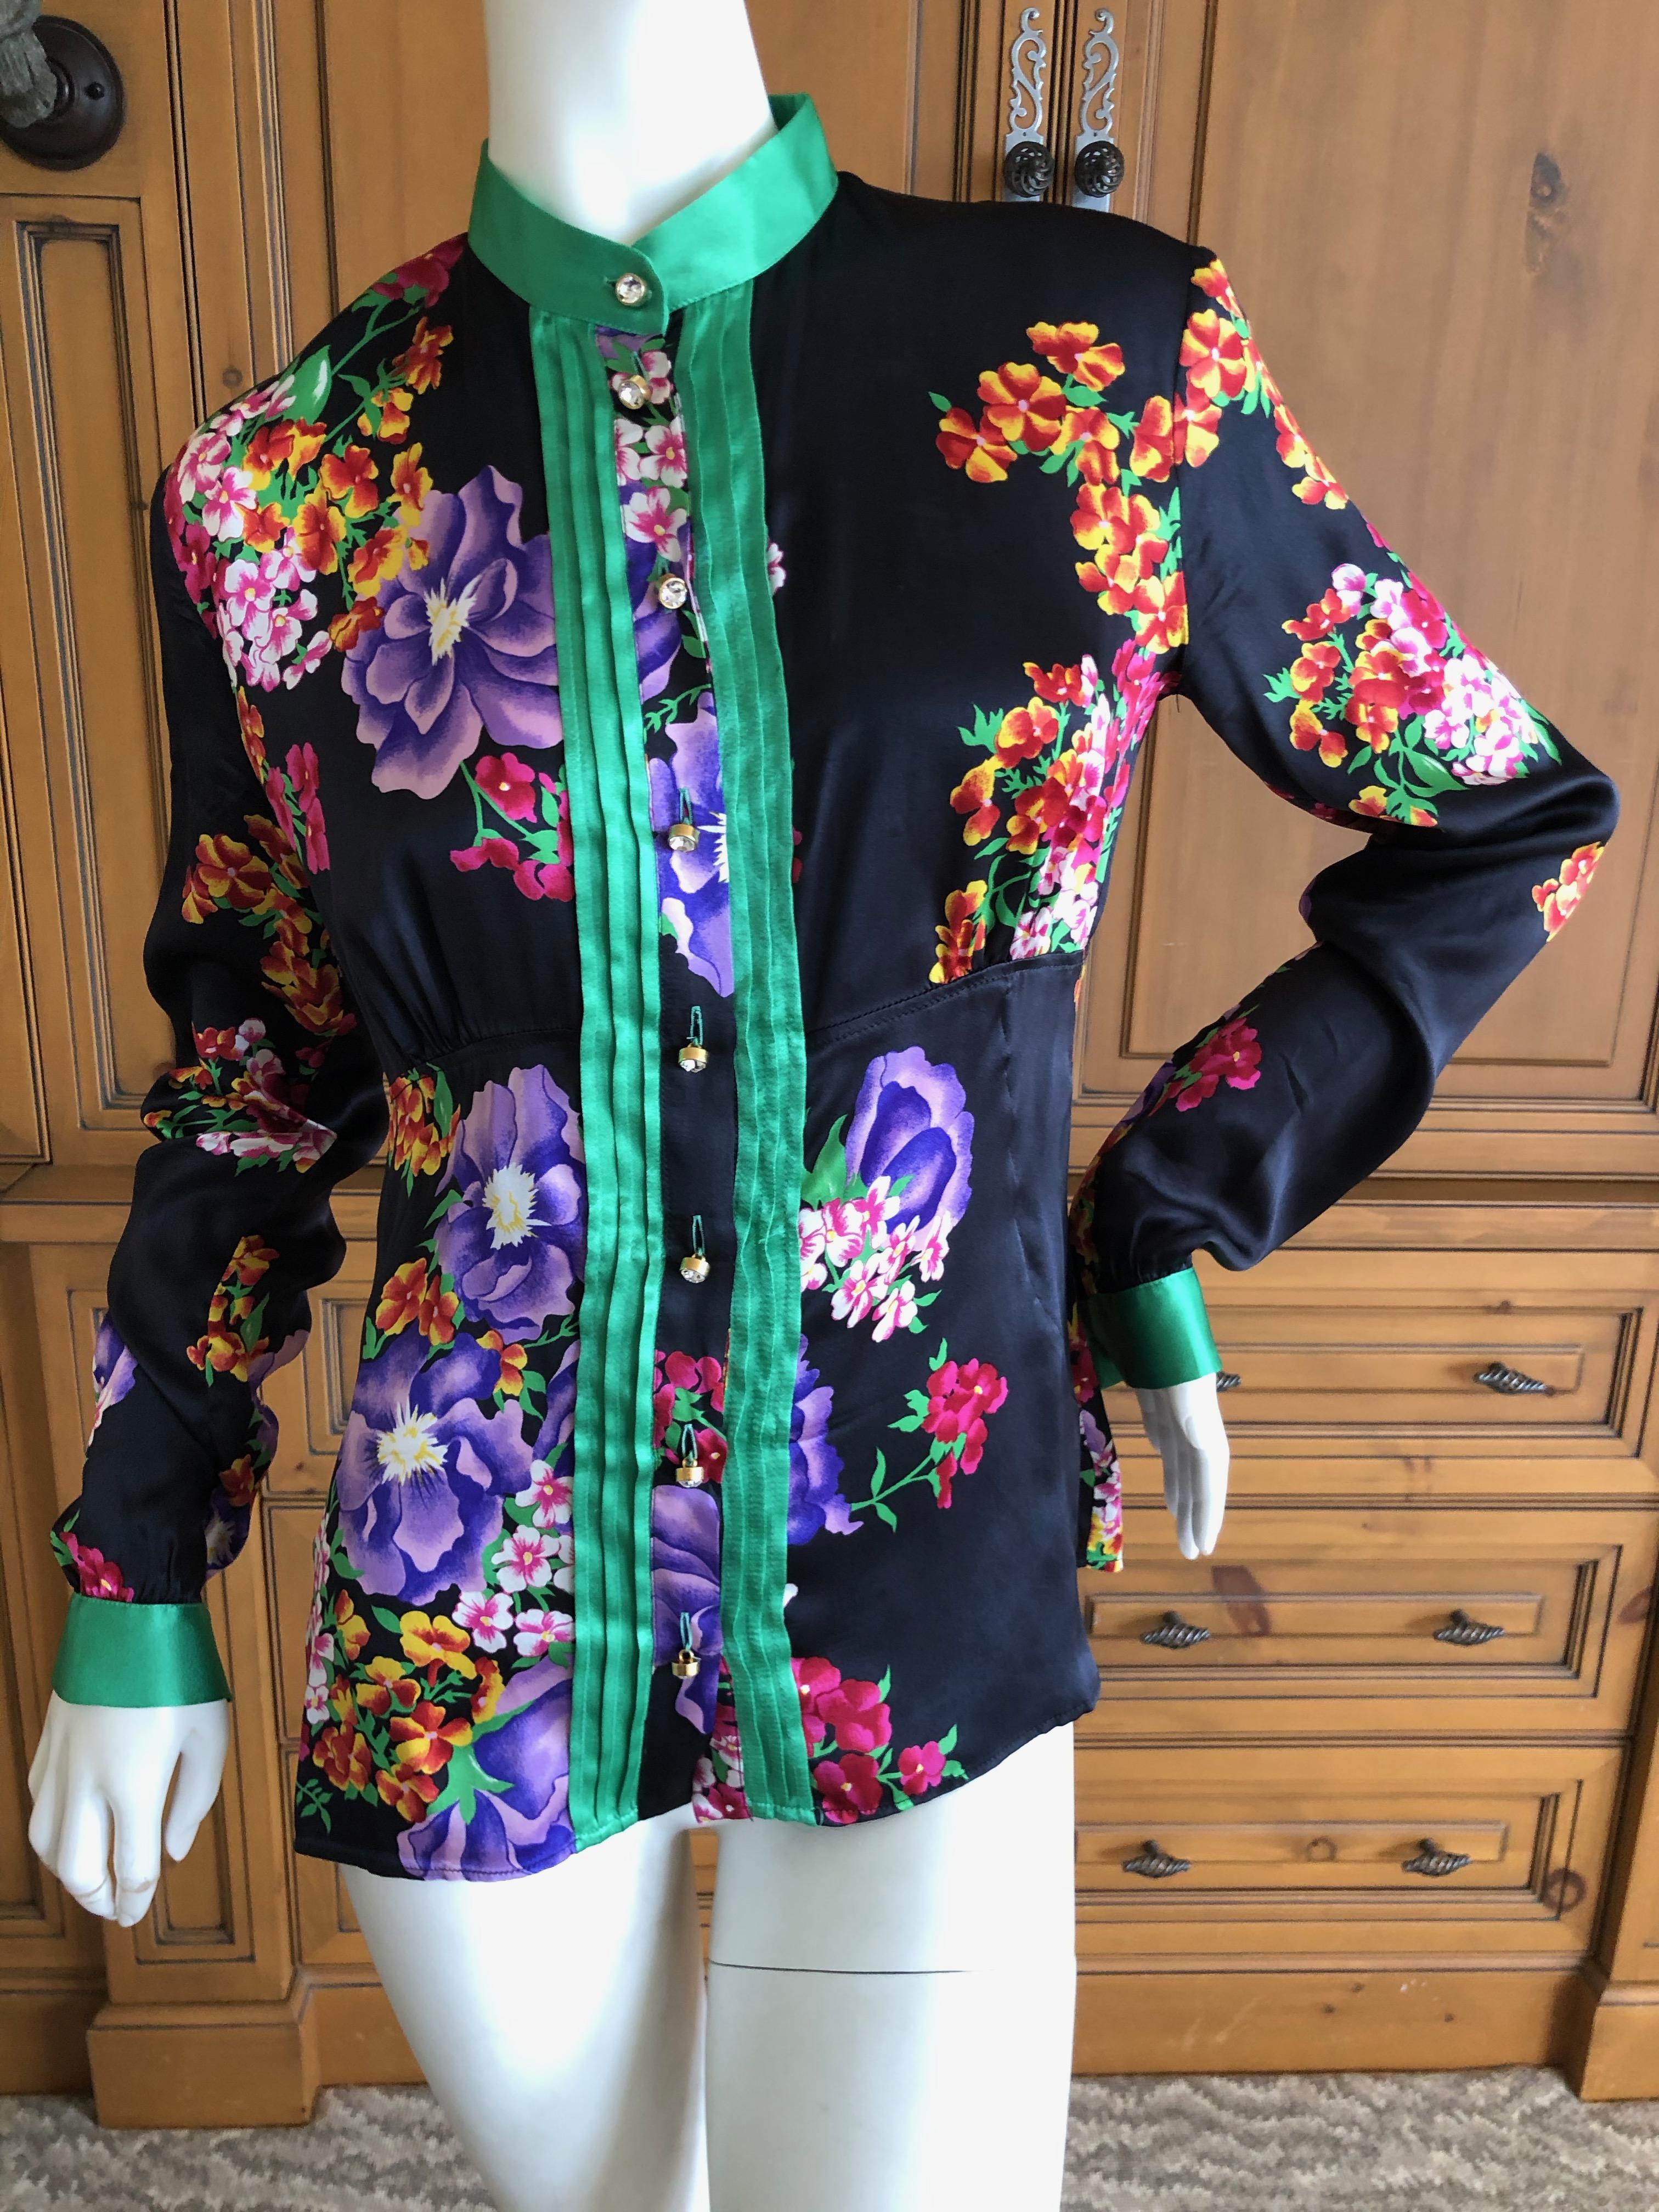 Dolce & Gabbana D&G Vintage Silk Floral Blouse with Large Crystal Buttons 
Size 40
Bust 36